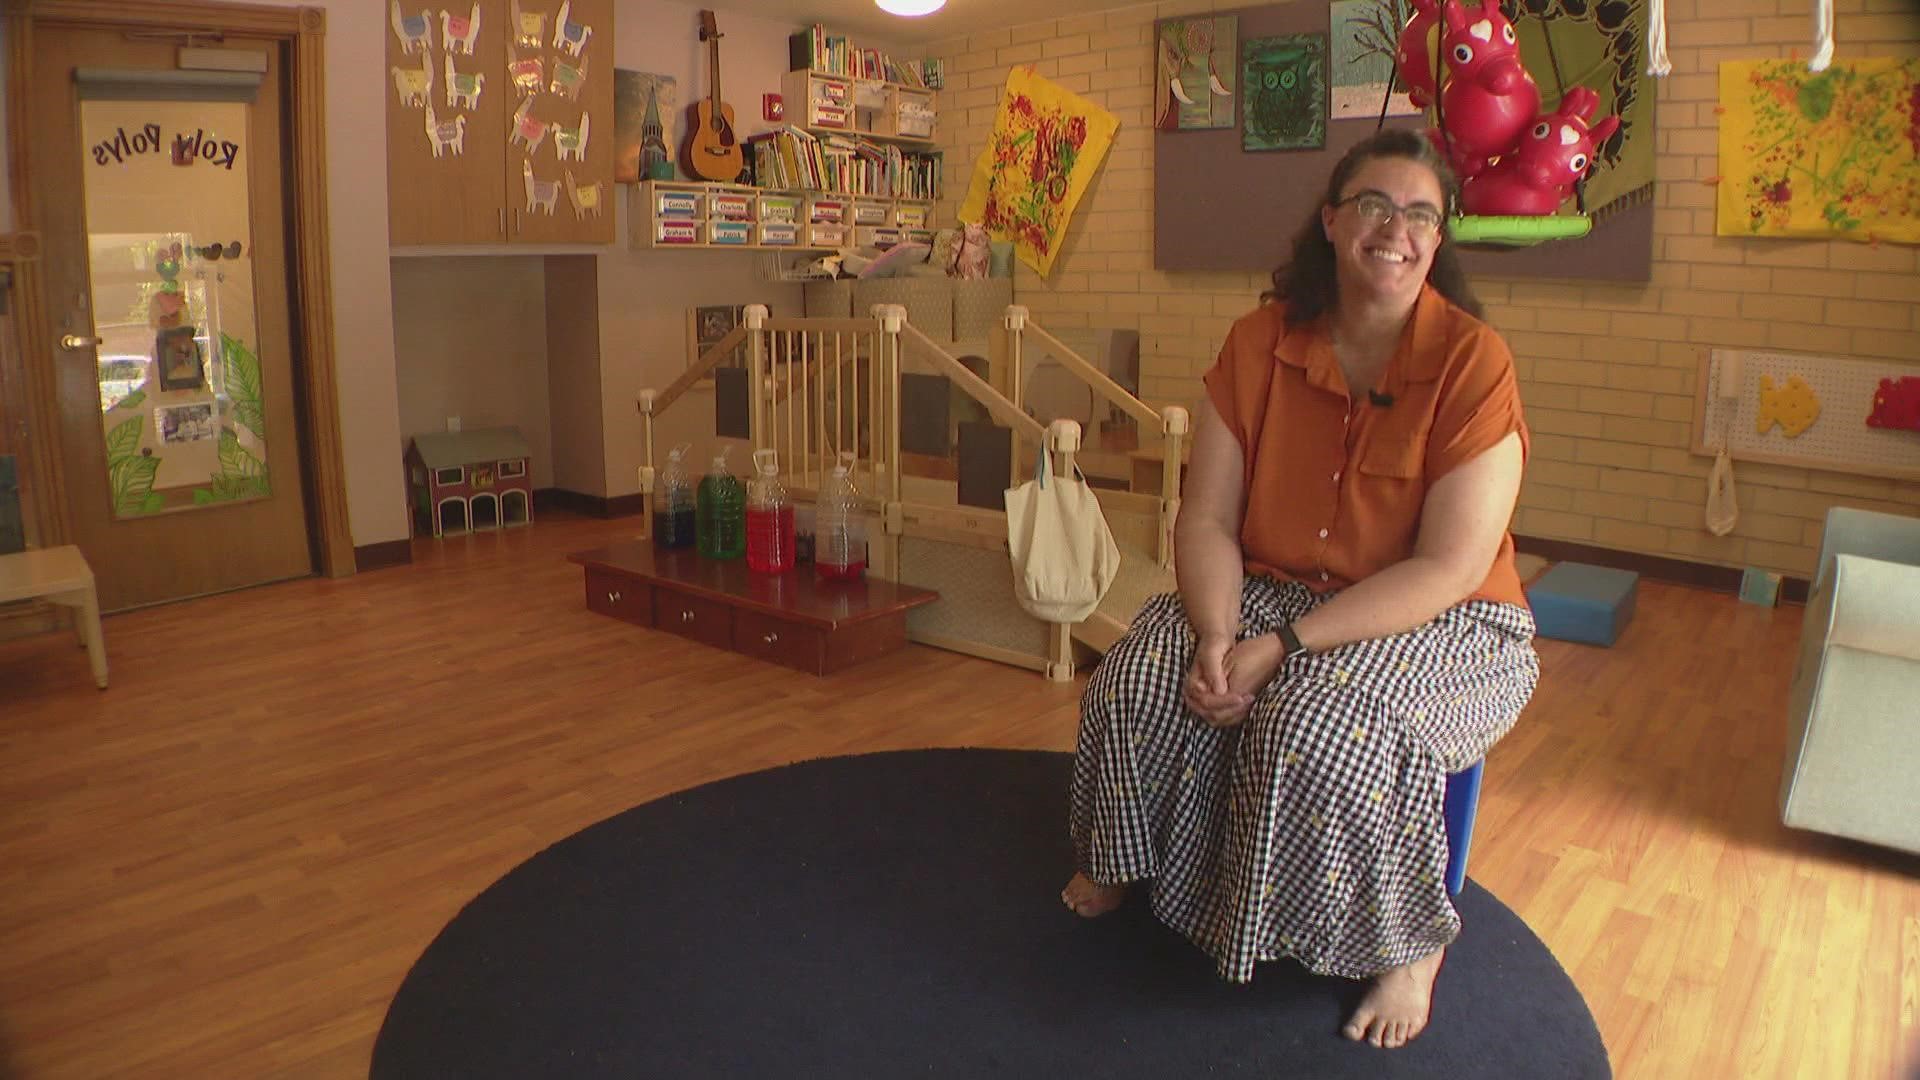 The Fisher Early Learning Center has always provided formula to infants in its classrooms, but staff can't find what they need on store shelves.